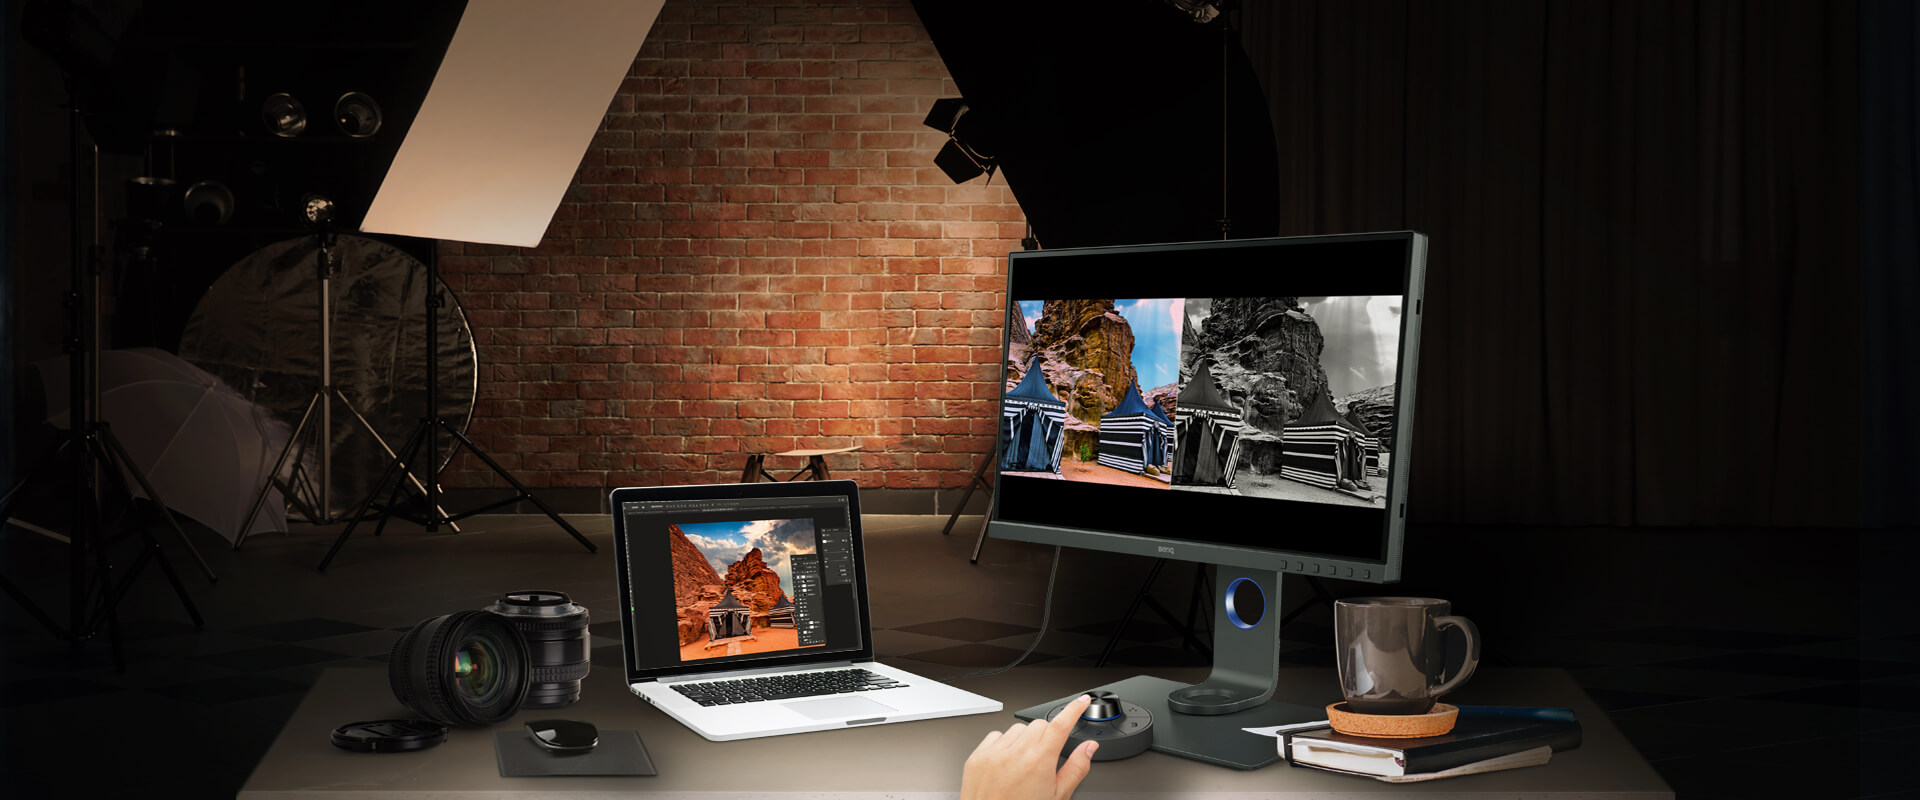 BenQ SW270C monitor on a desk angled to the left along with a DSLR camera and accessories, laptop with photo-editing software on screen, a control button, books and a coffee mug. Behind the desk is a brick wall and photo lighting equipment